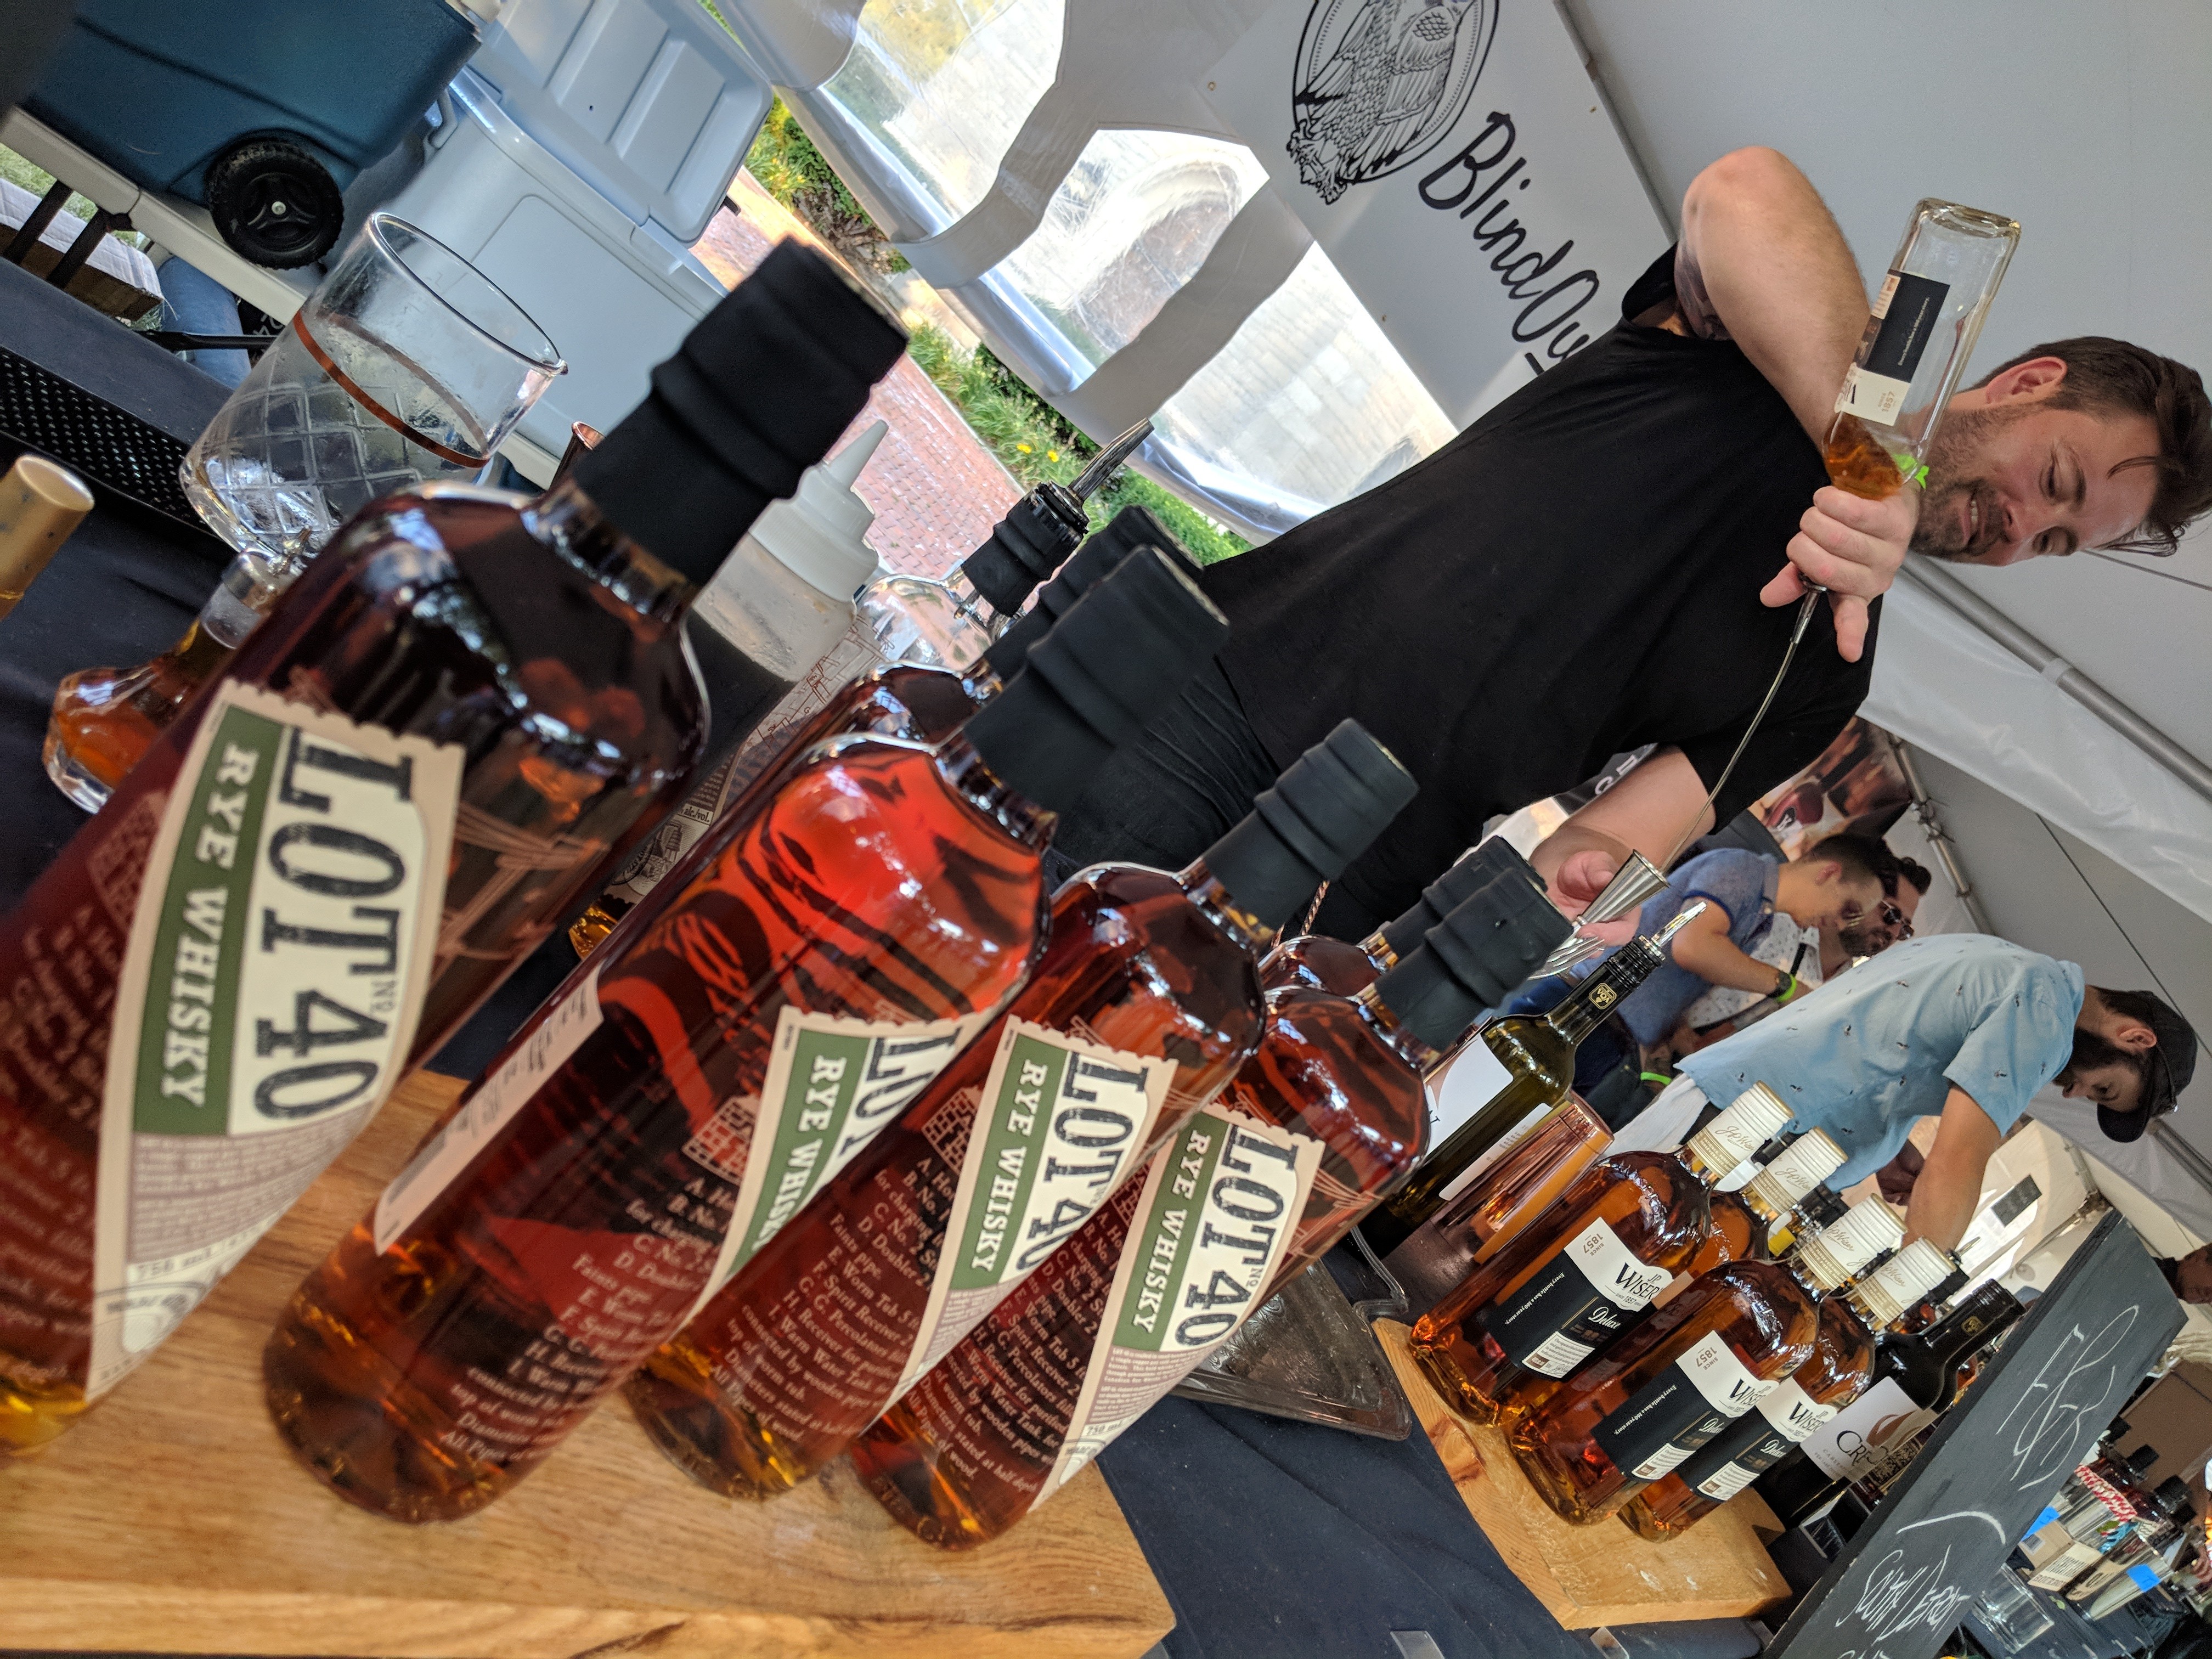 Pouring cocktails at the Whiskytown Festival in Windsor, Ontario.